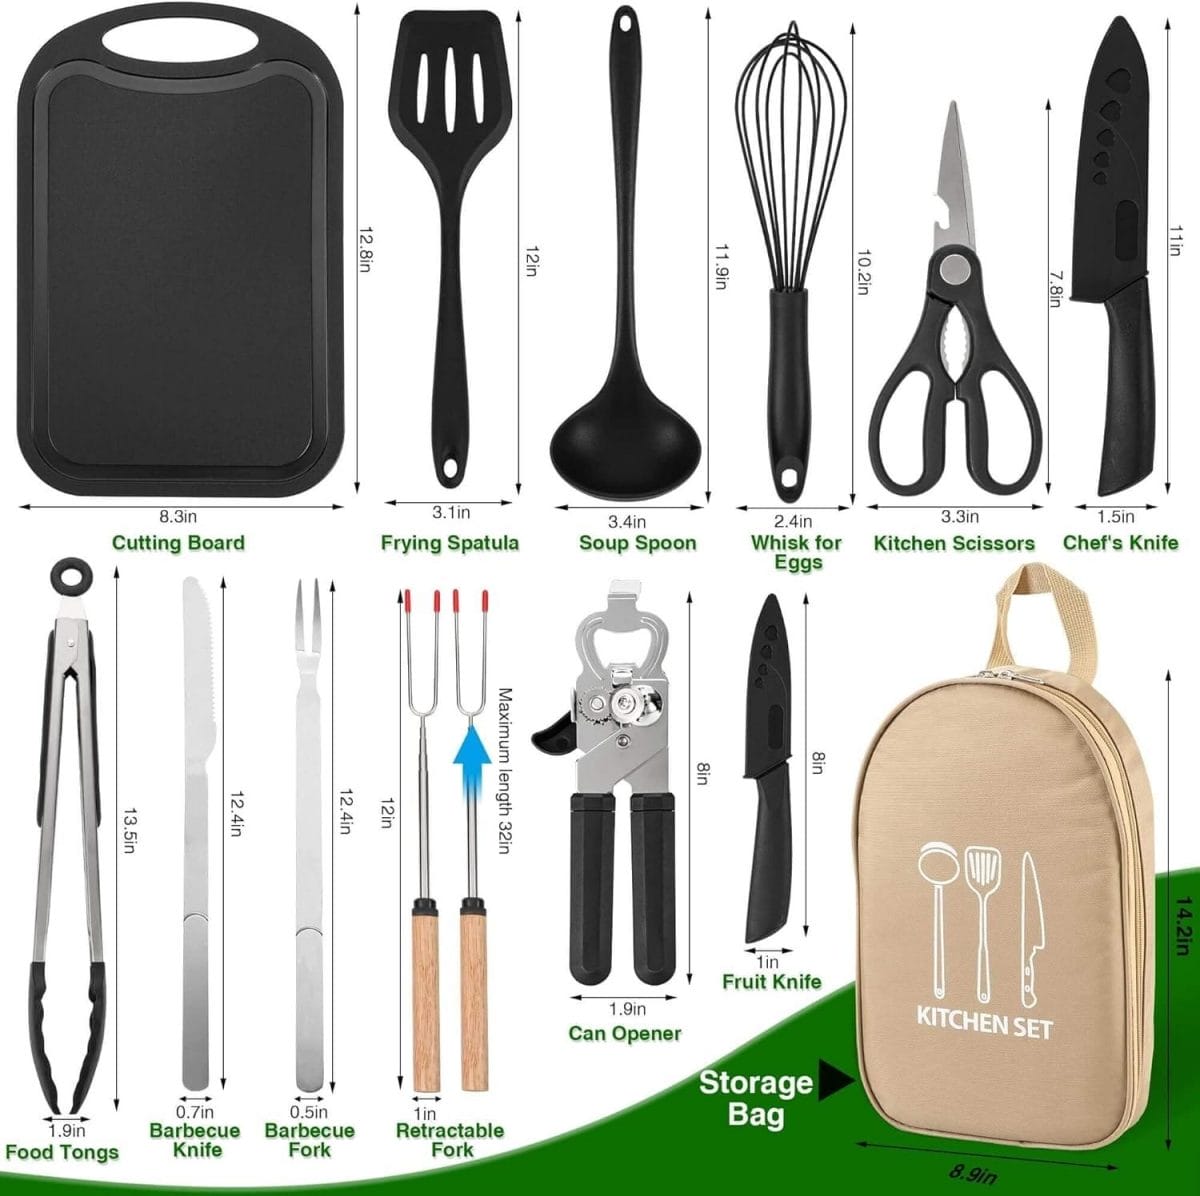 Camping Cookware Cooking Utensils Set - Portable Camping Kitchen Utensils, Outdoor Camping Essentials Accessories, Stainless Steel  Silicone, Camping Gear Equipment for RV Picnic Grill